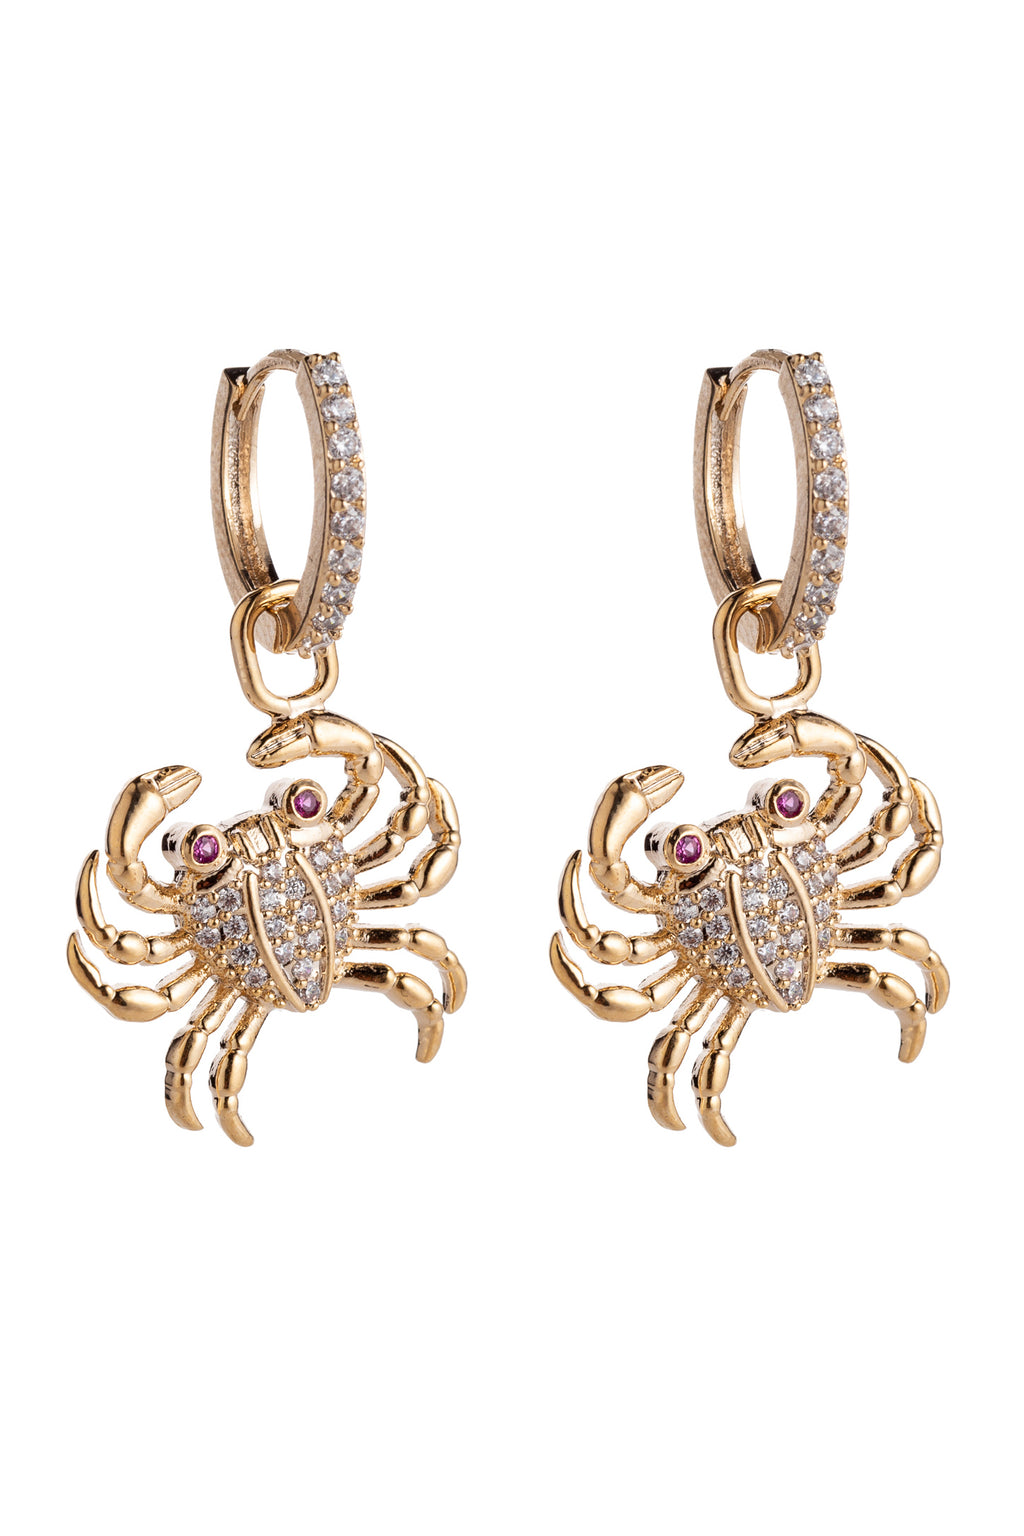 Gold tone bras crab huggie earrings studded with CZ crystals. 